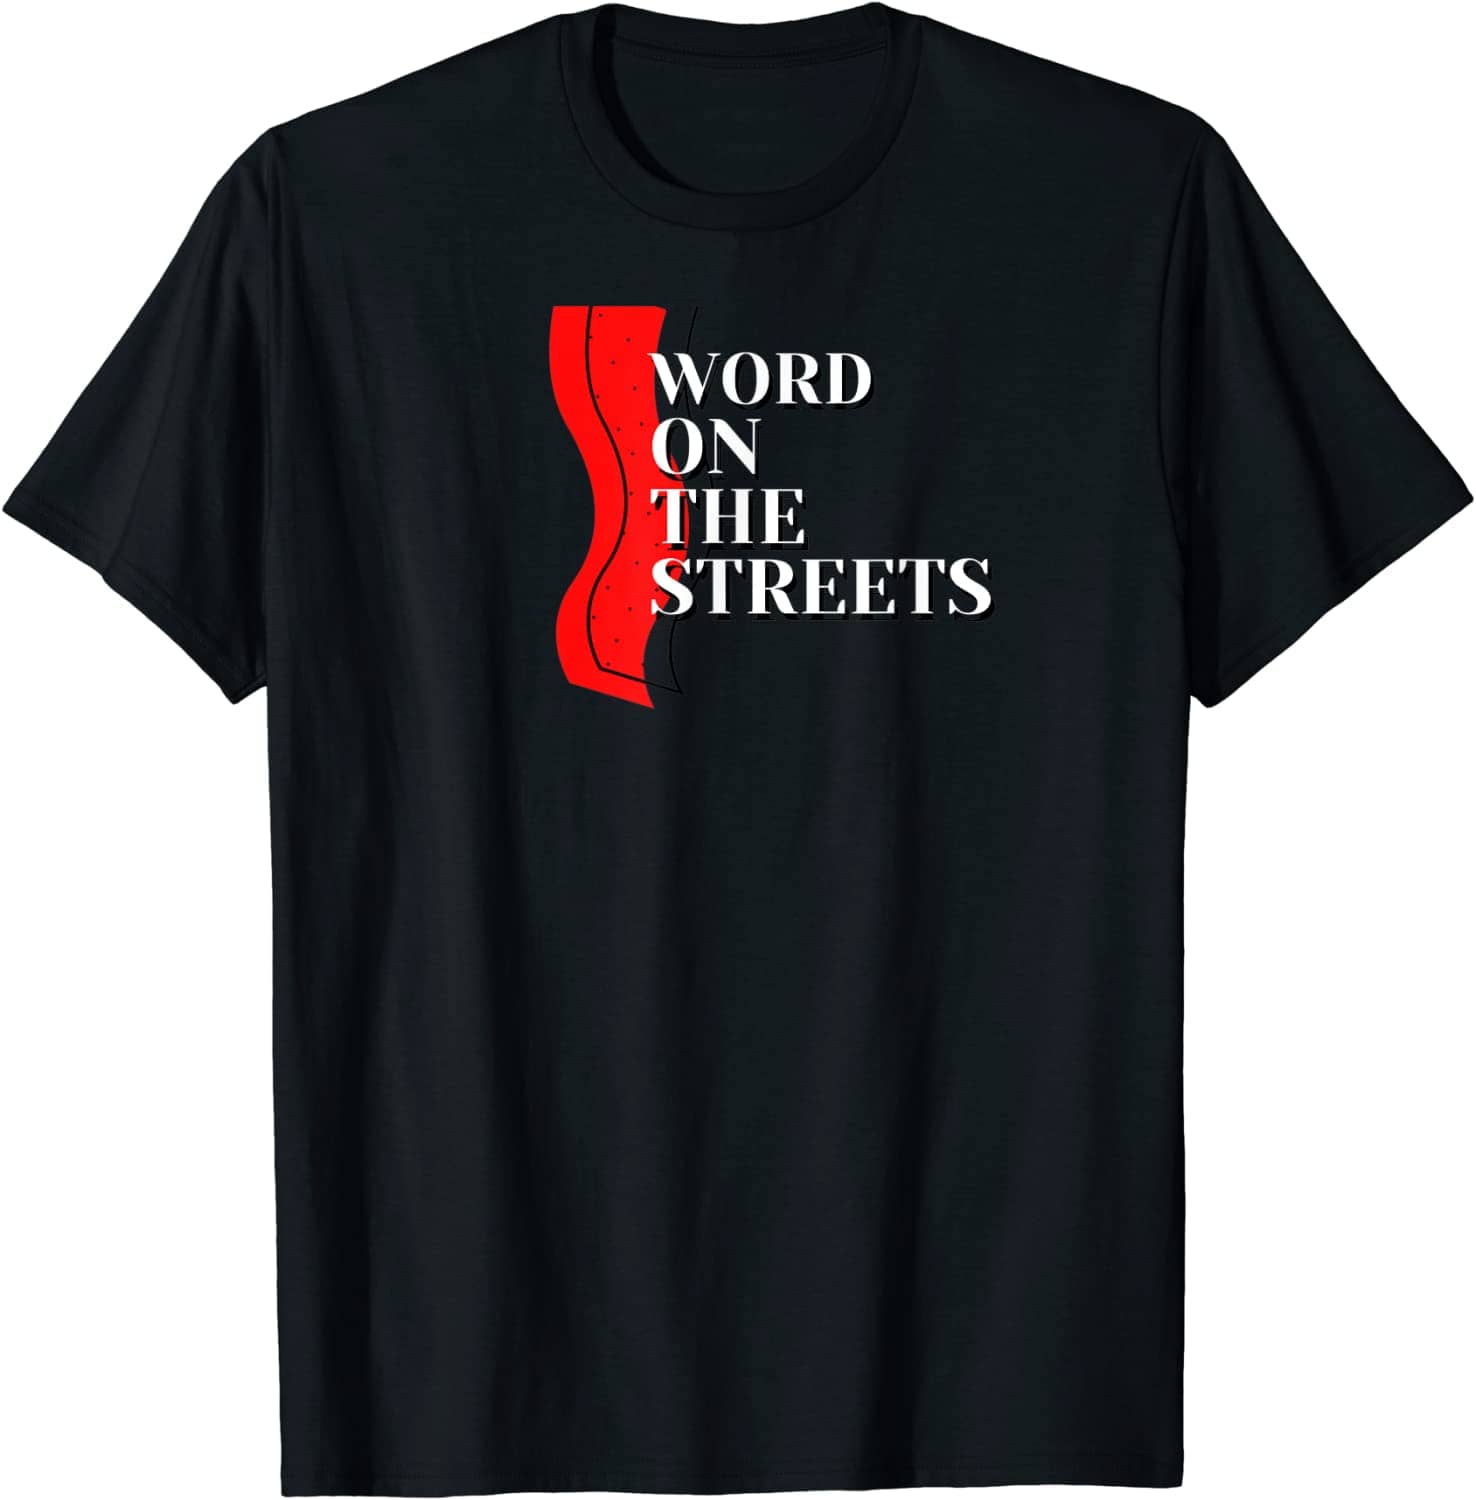 WORD ON THE STREETS T-SHIRT